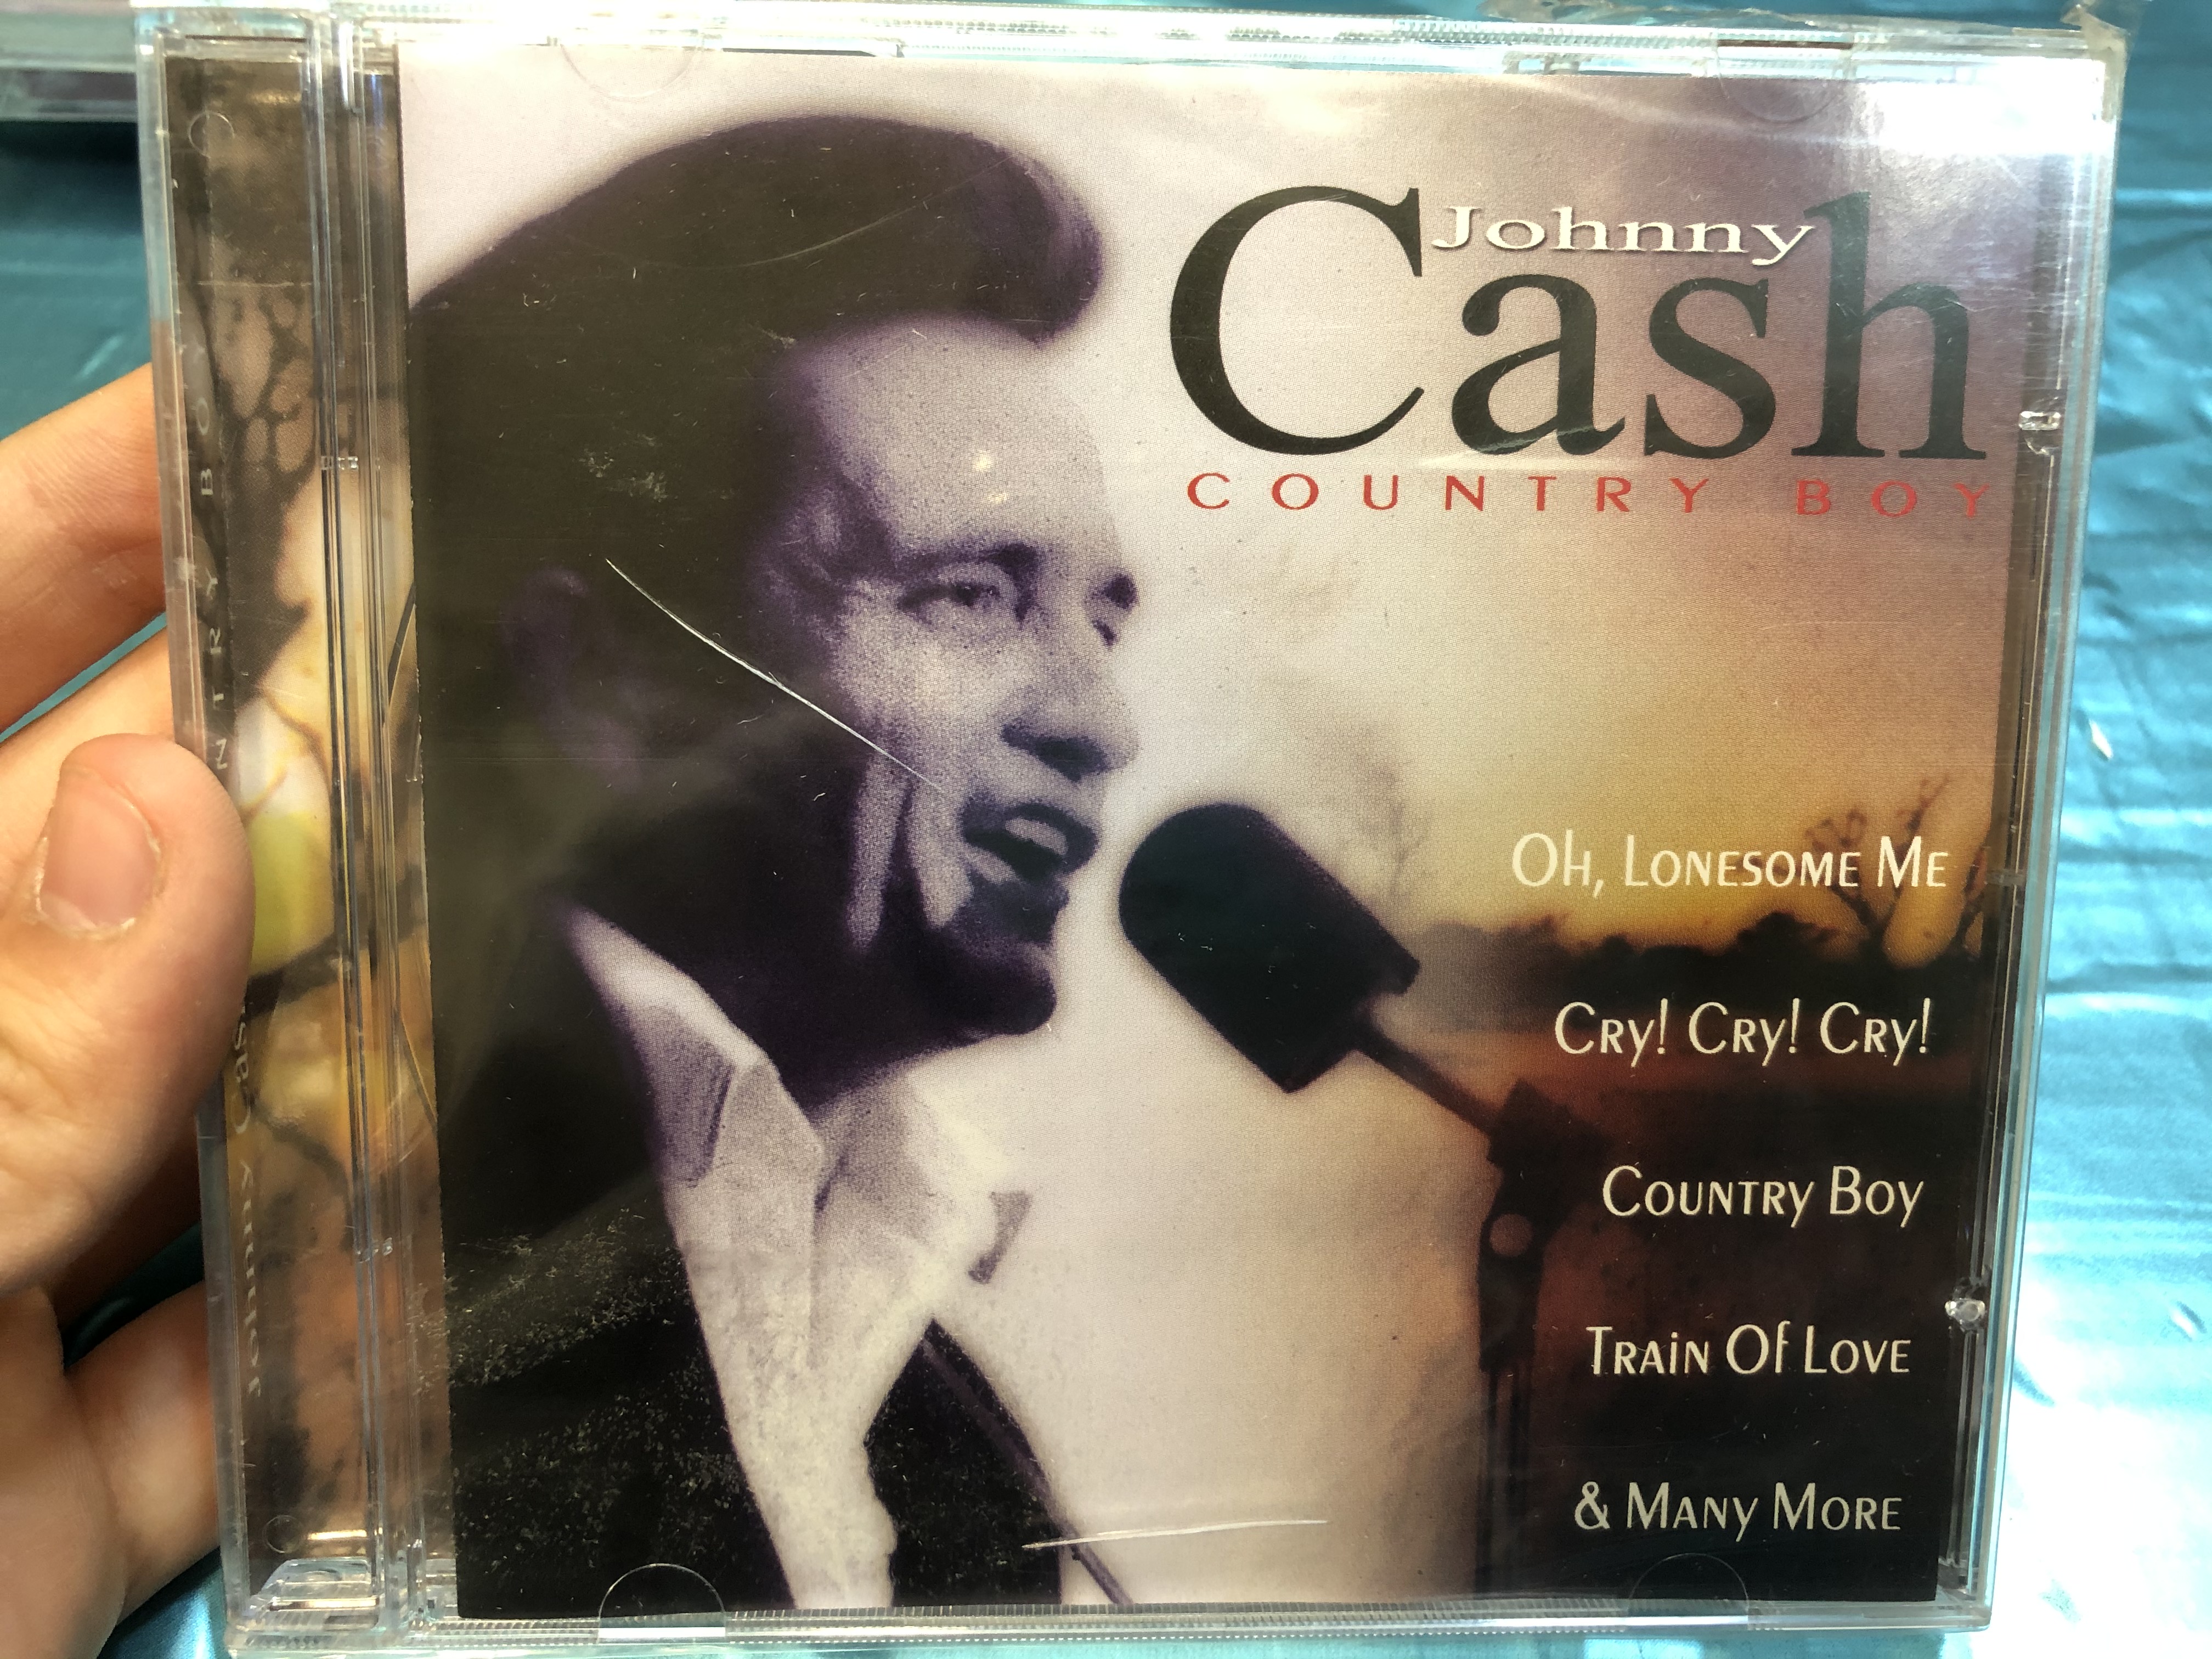 johnny-cash-country-boy-oh-lonesome-me-cry-cry-cry-country-boy-train-of-love-many-more-musicbank-limited-audio-cd-2000-apwcd1111-1-.jpg